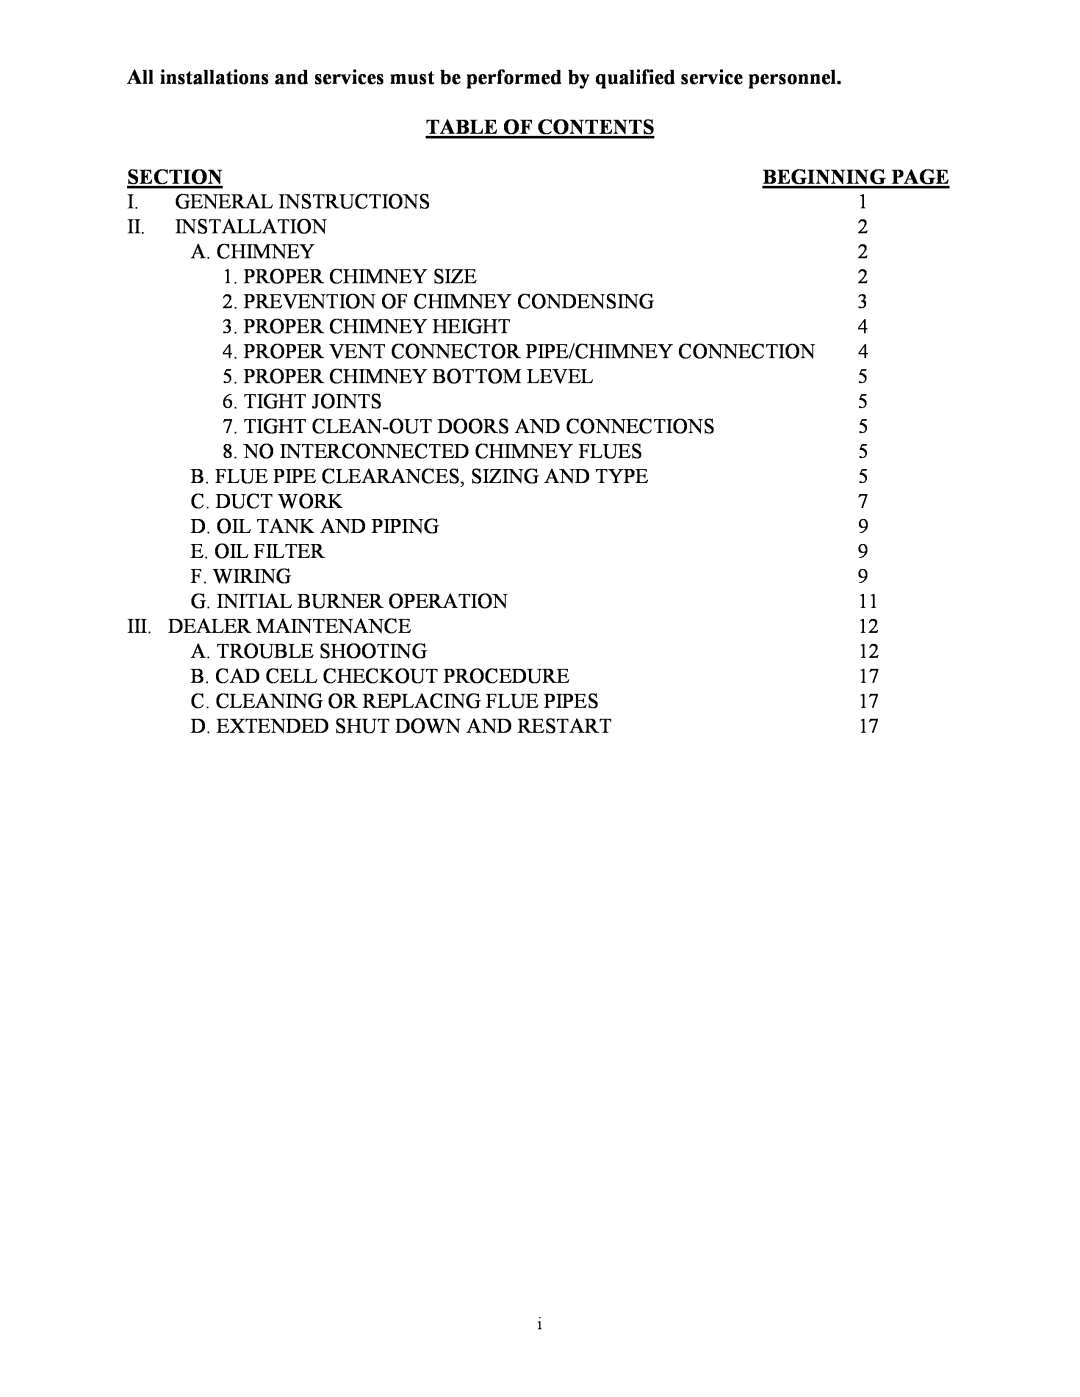 Thermo Products MO-425 manual Table Of Contents, Section, Beginning Page 